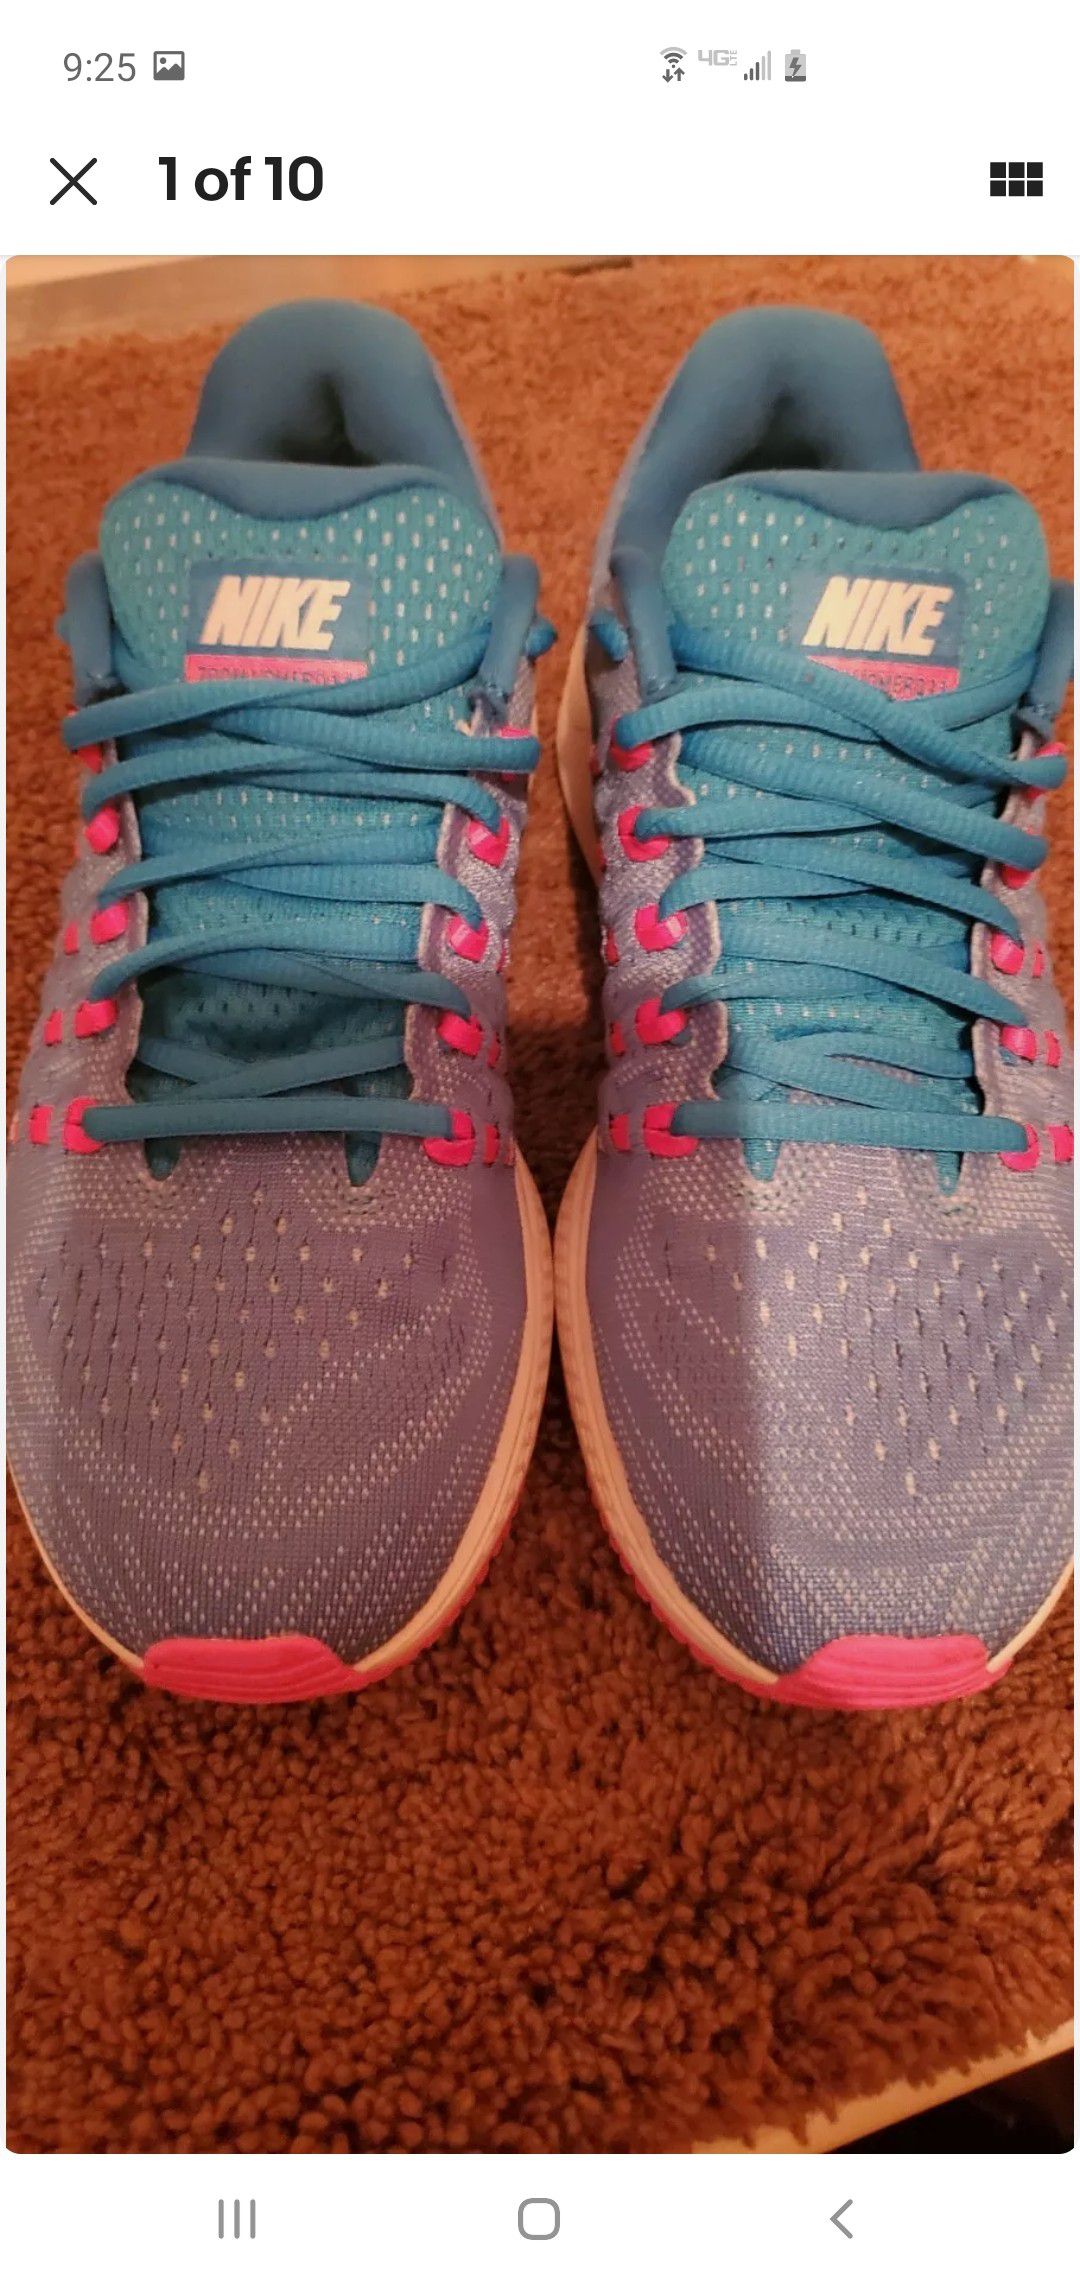 Nike Air Zoom Vomero 11 Running Shoes Blue/Pink/White 818100-401 Womens Sz 8